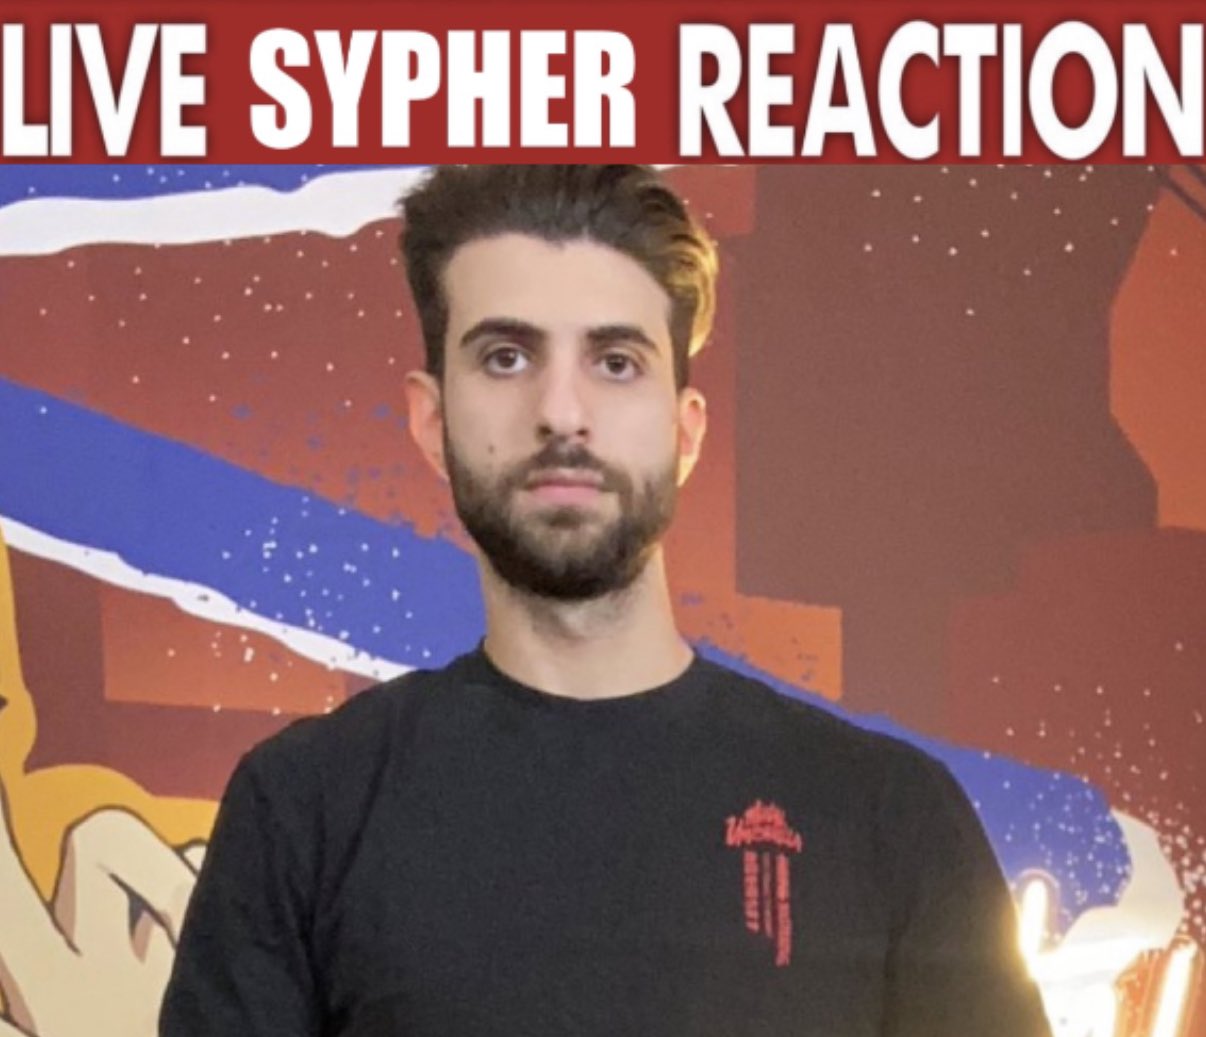 Live sypher reaction Blank Template Imgflip